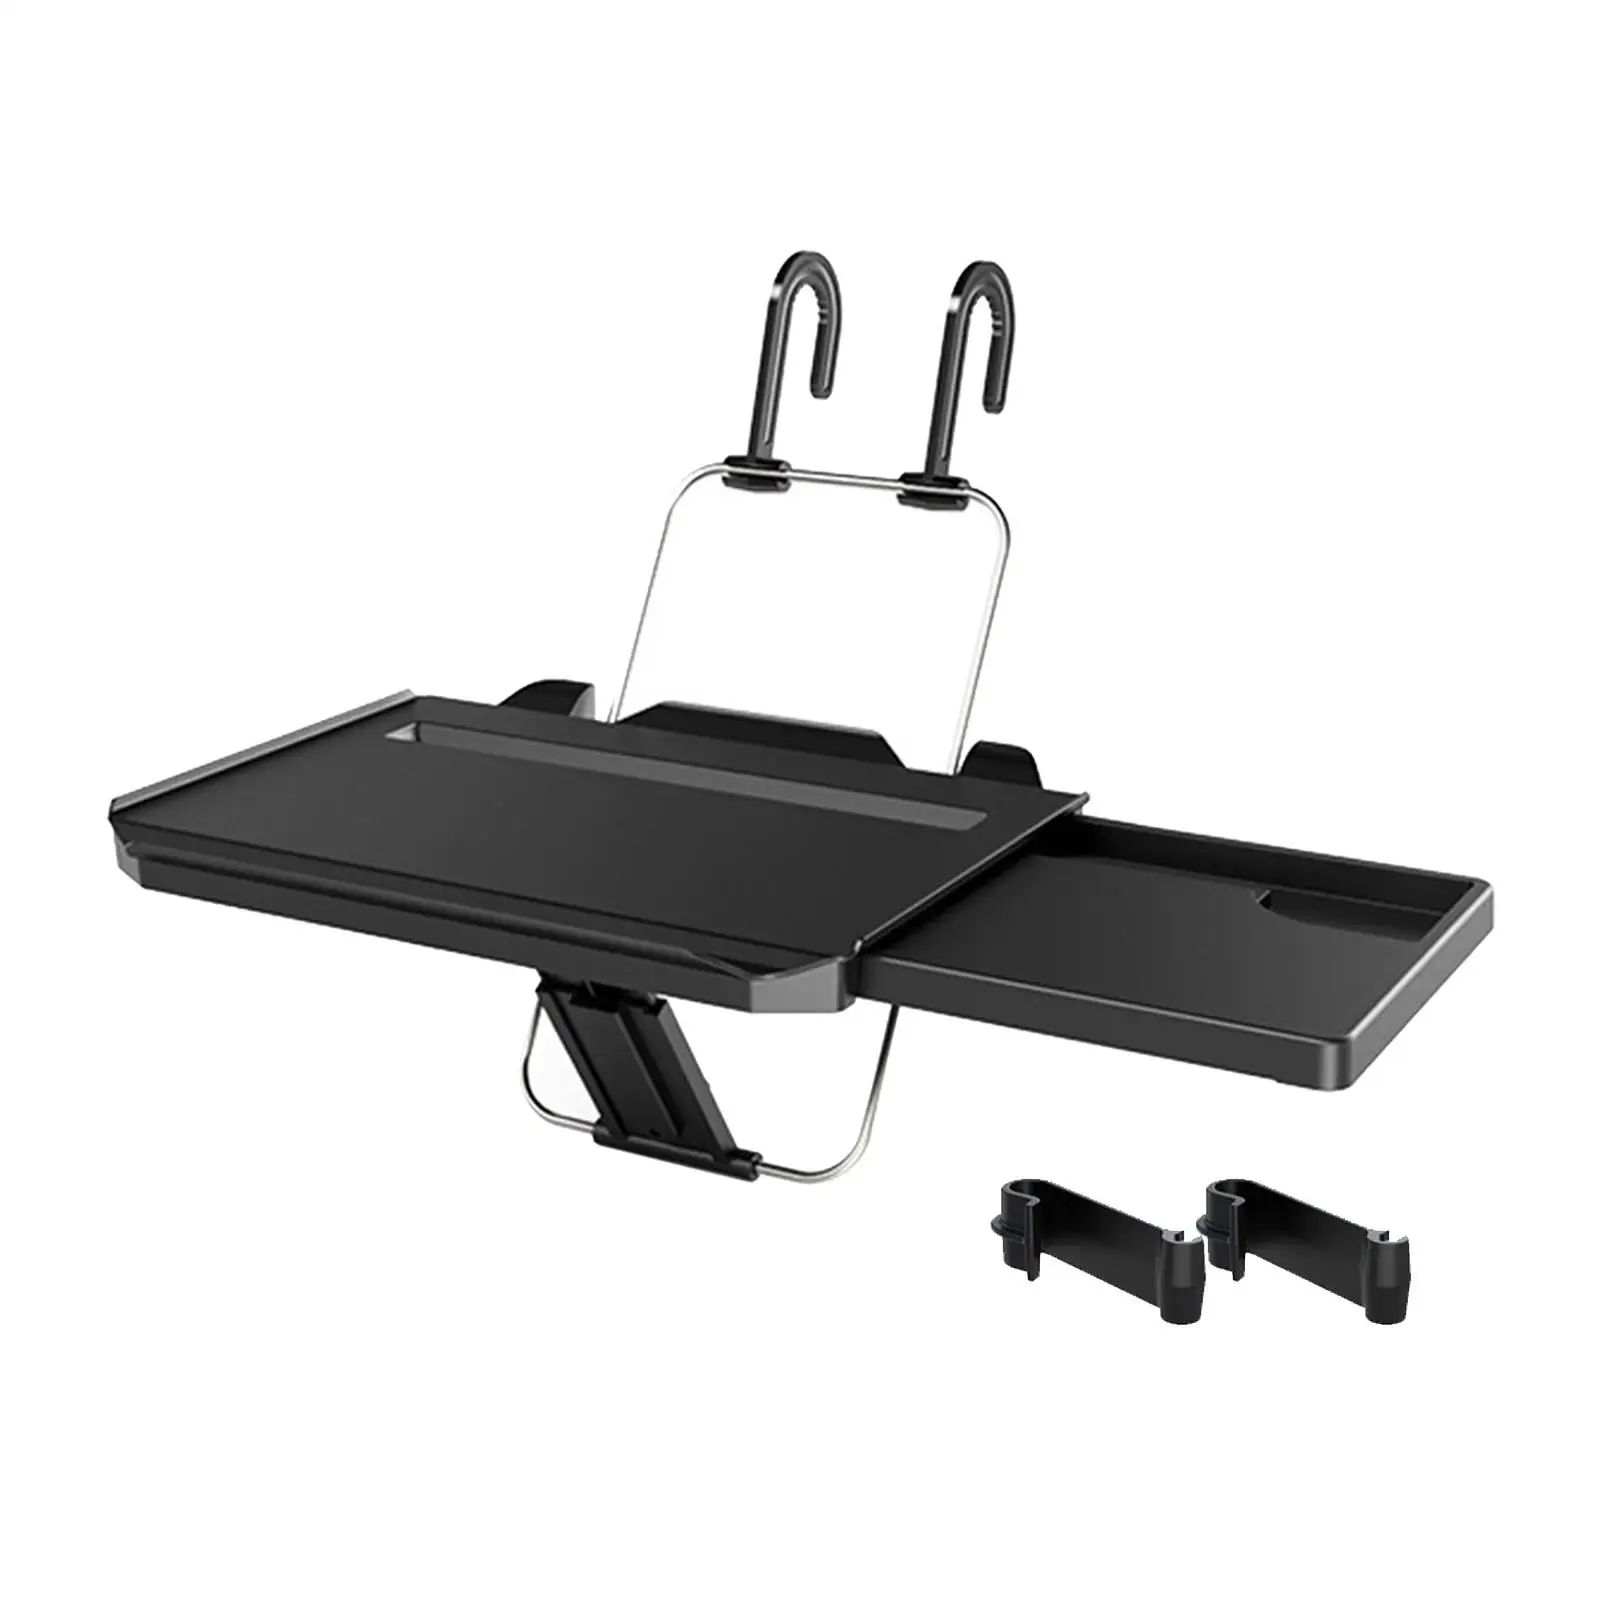  Car Steering  Table Car Desk Portable Organizers Car Computer Rack Convenient Back Seat Headrest  for Eating Food